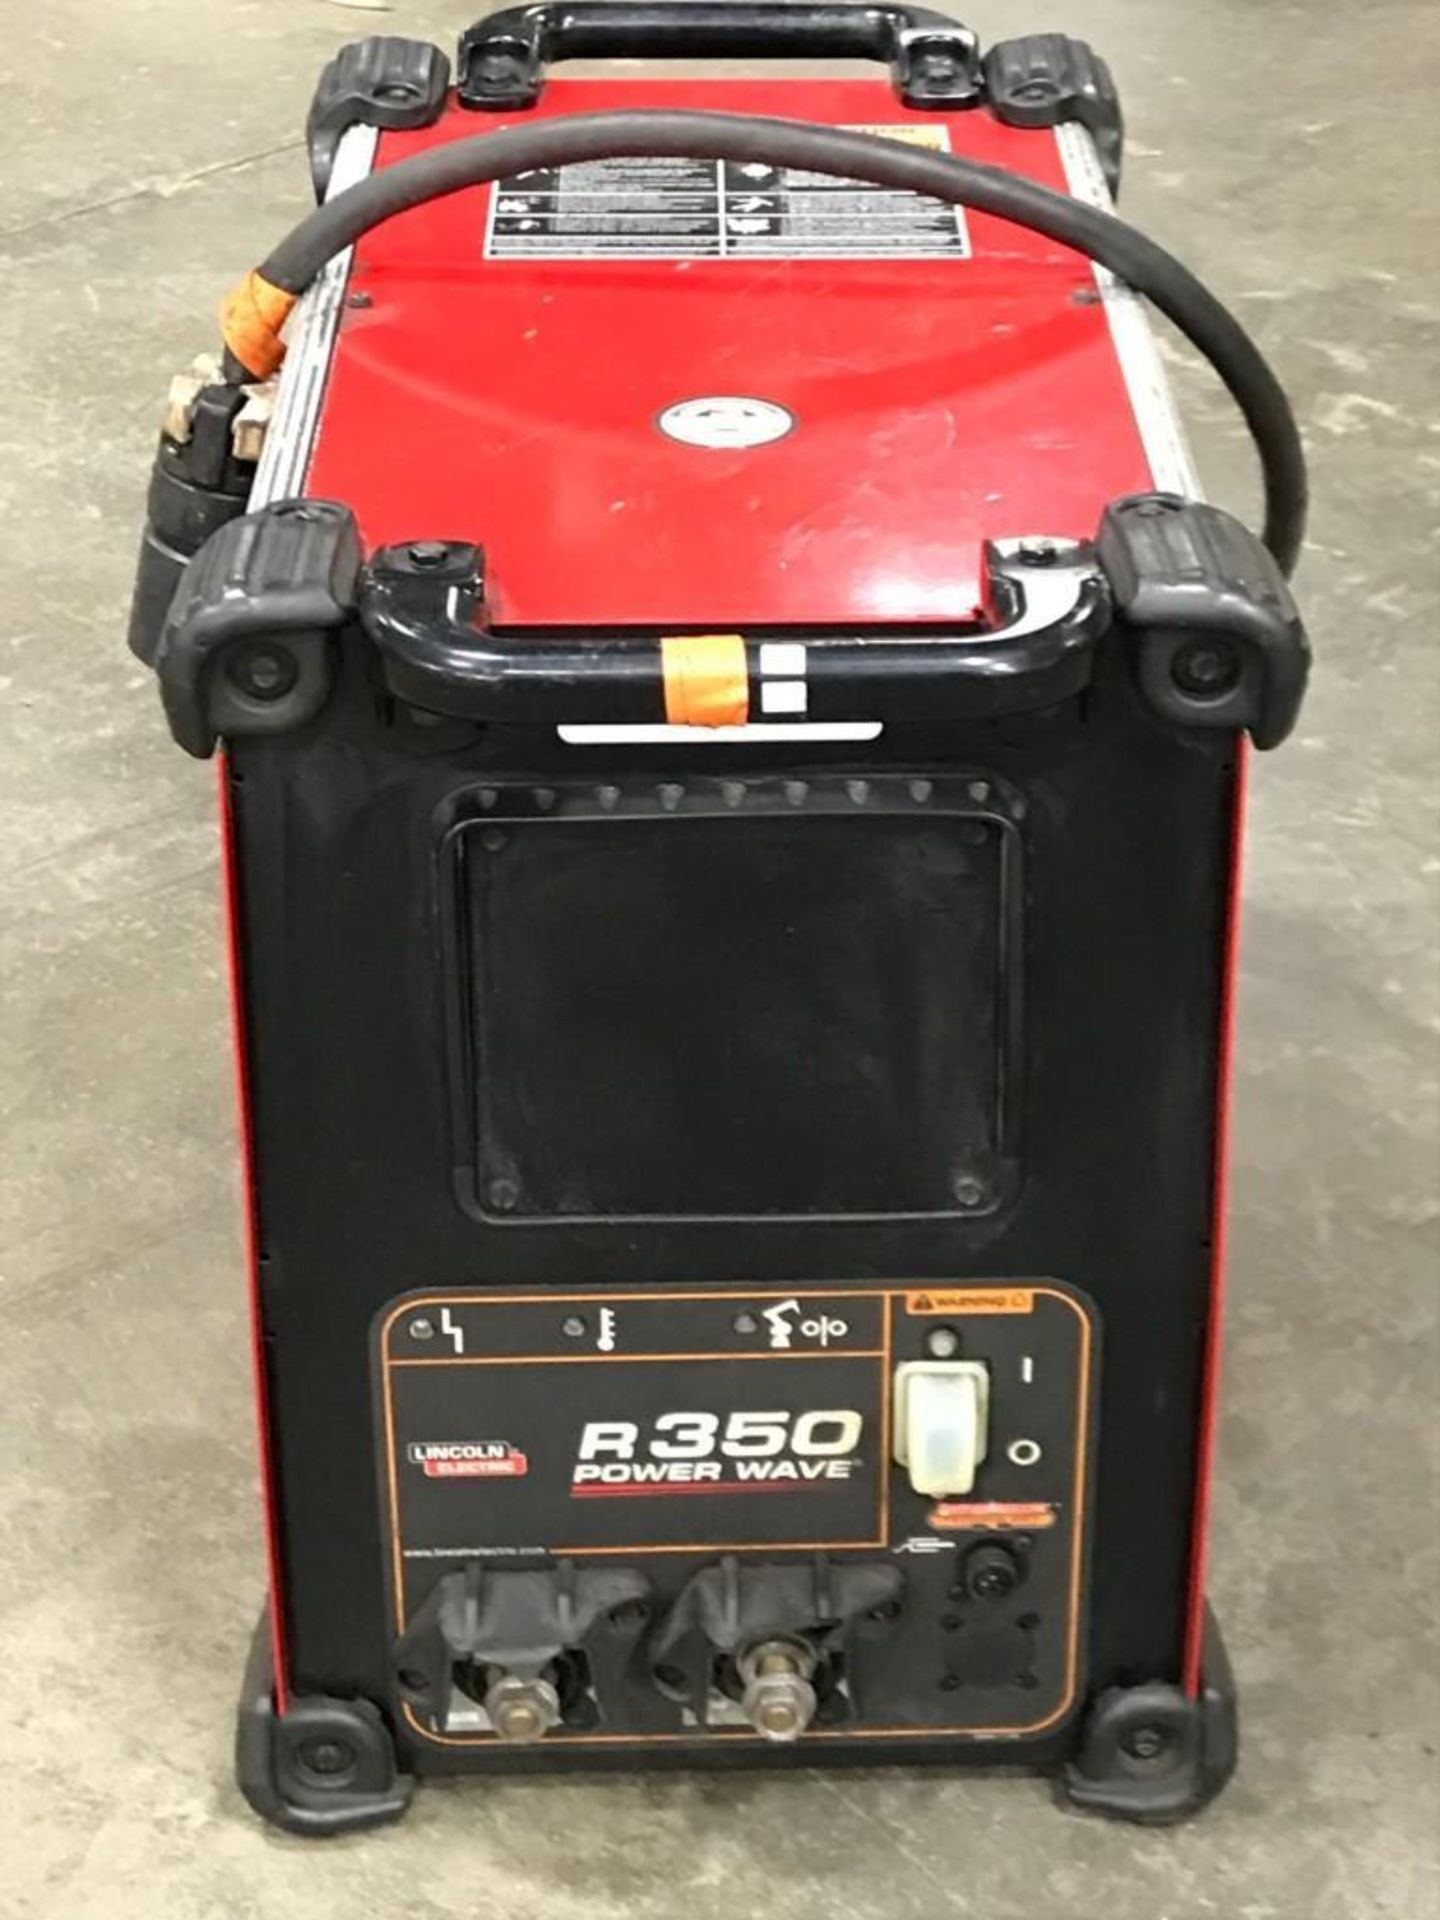 Lincoln R350 Power Wave Welder - Image 4 of 6